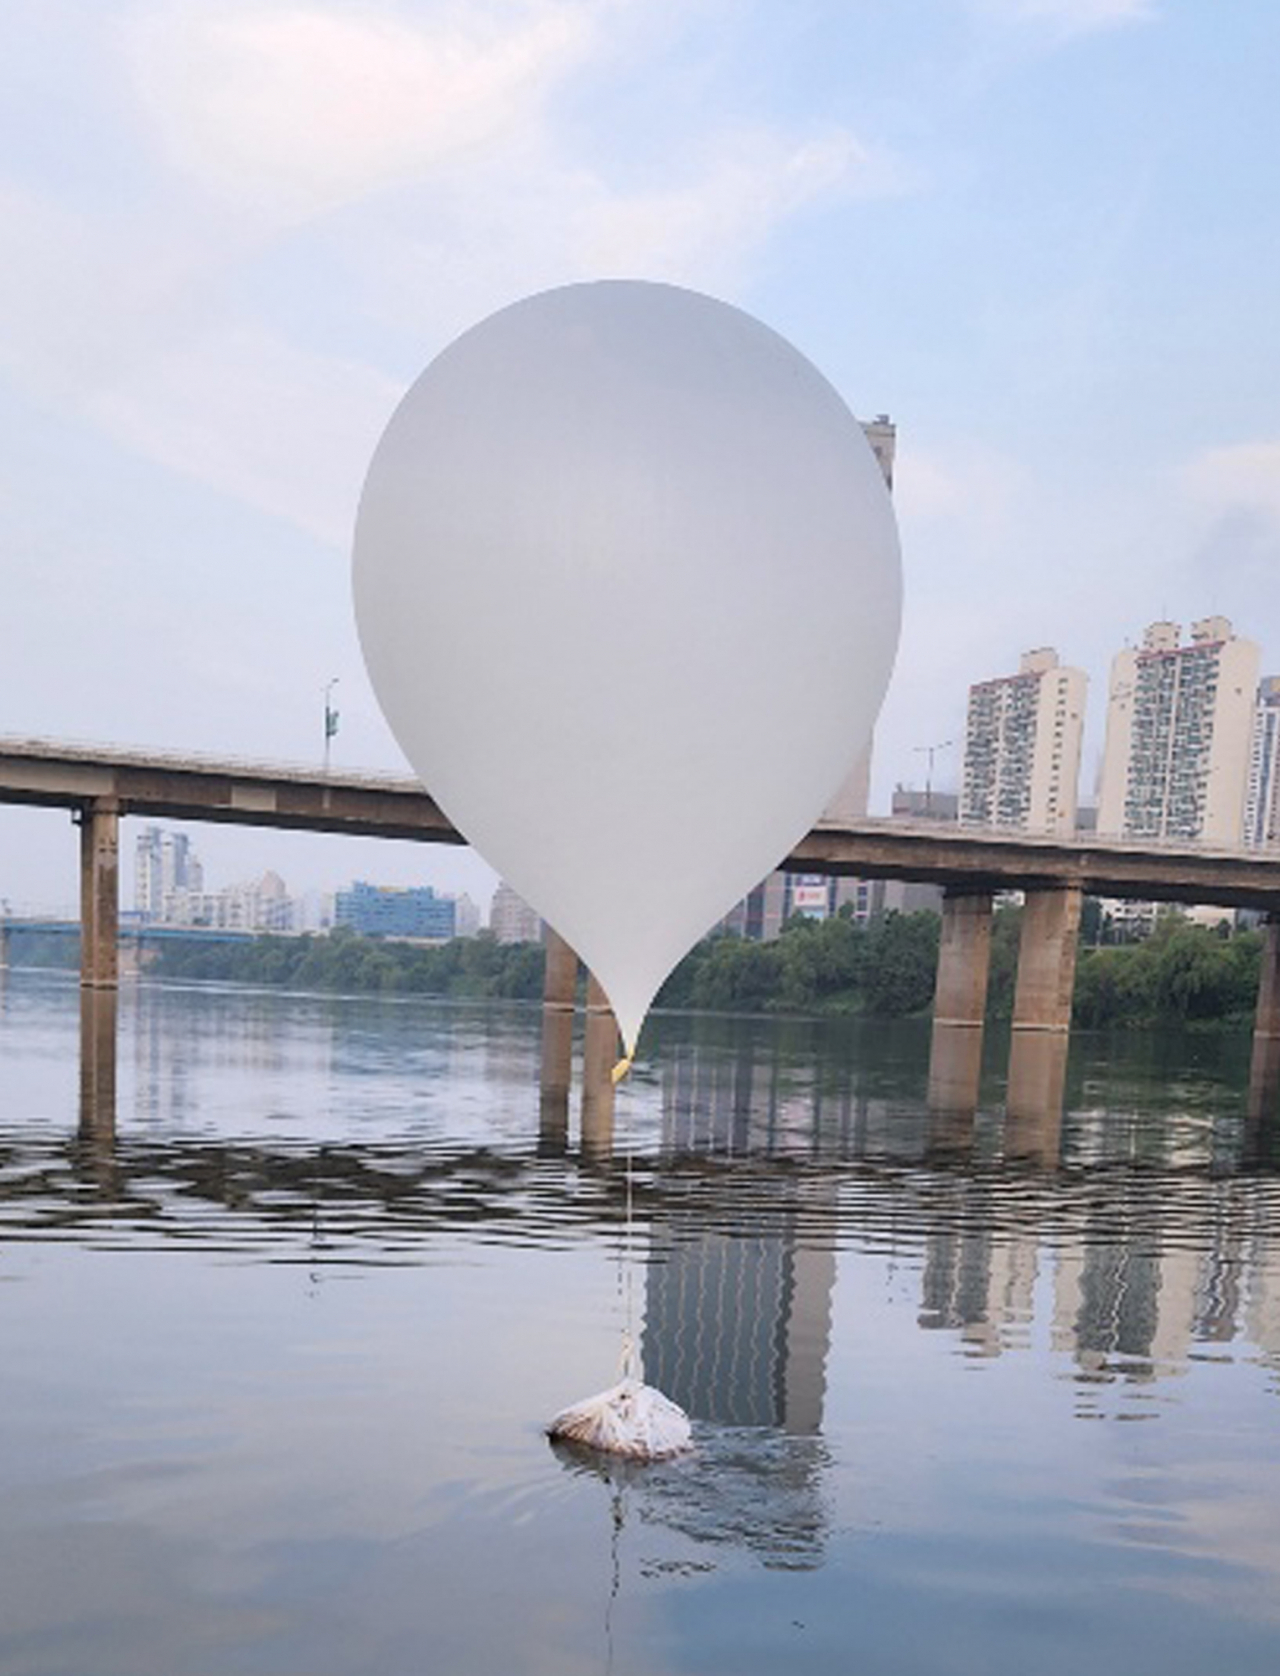 A balloon carrying garbage, sent by North Korea, is seen floating on the Han River in Seoul on Jun. 9. (The Joint Chiefs of Staff)